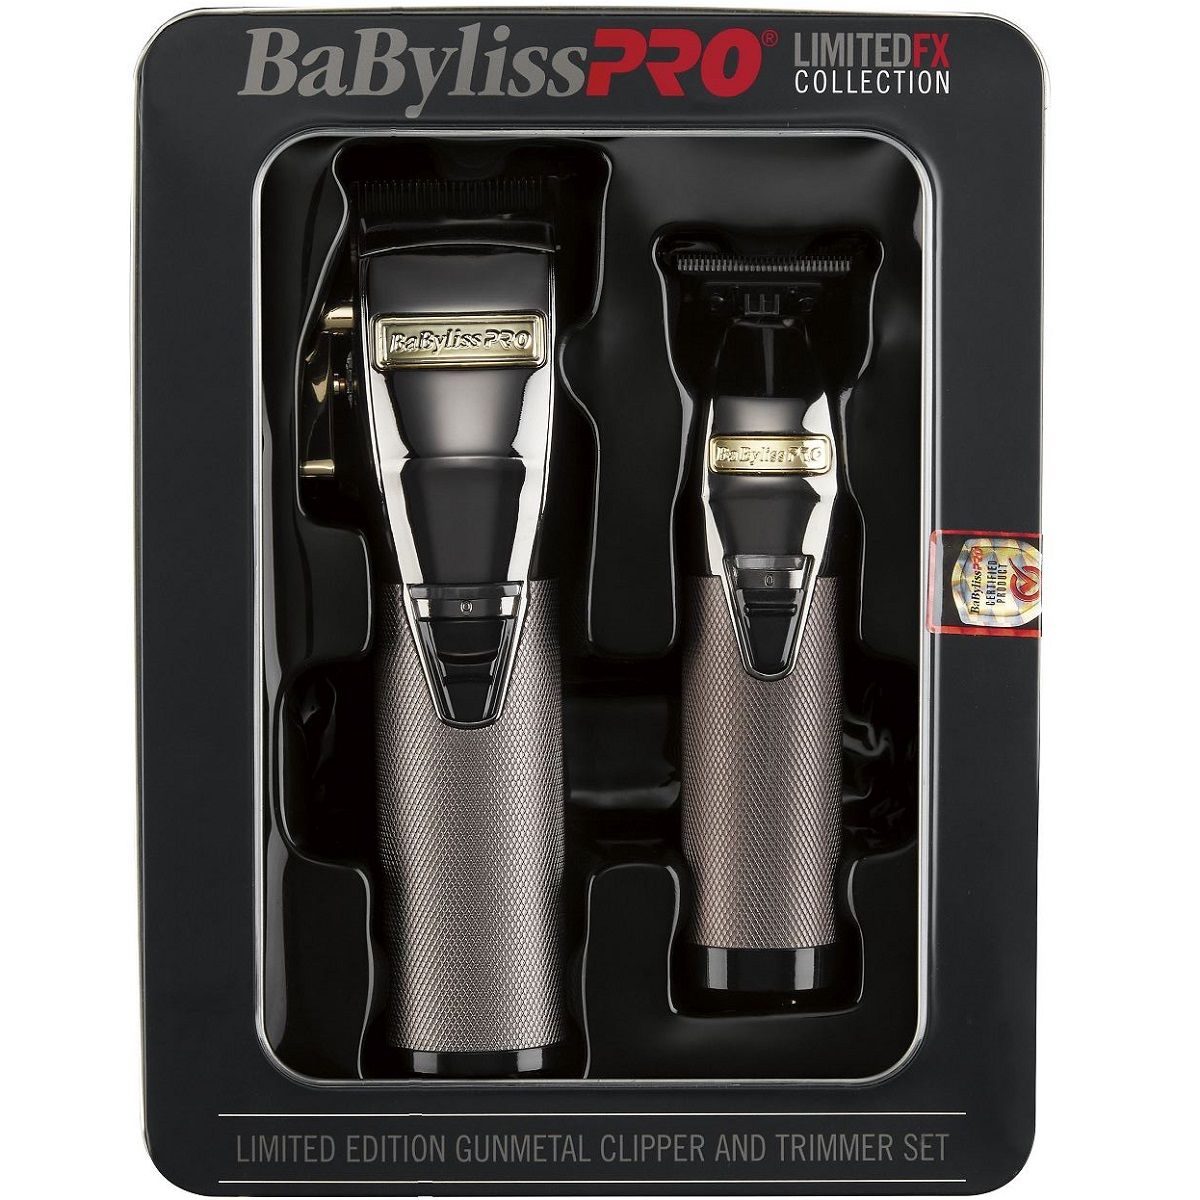 BaByliss Pro LIMITEDFX Collection - Limited Edition Gunmetal